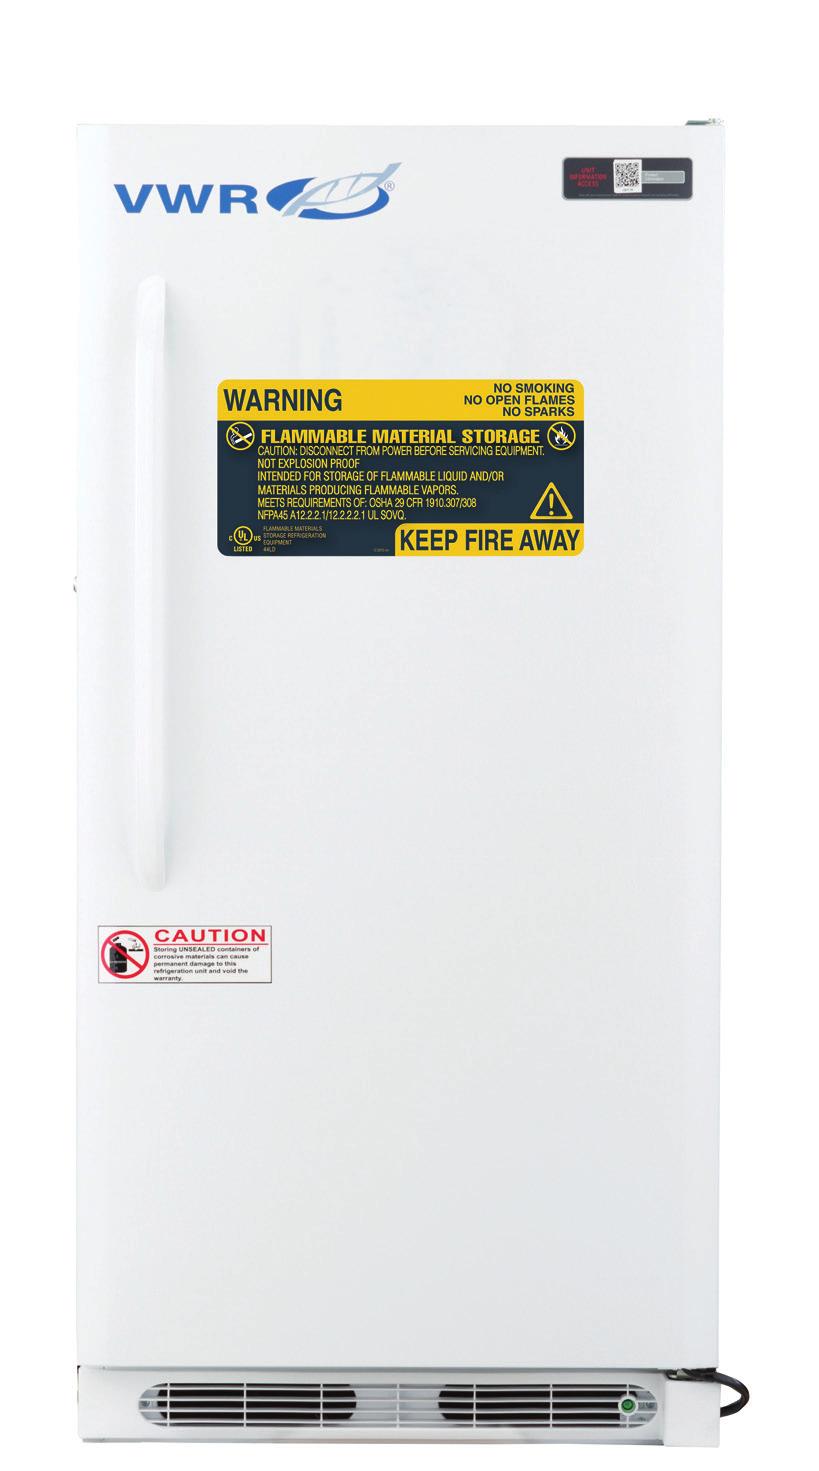 VWR STANDARD SERIES FLAMMABLE REFRIGERATORS & FREEZERS 1 to 10 C [Refrigerator] -15 to -25 C [Freezer] No internal electrical components inside of unit Electrical compressor components sealed in